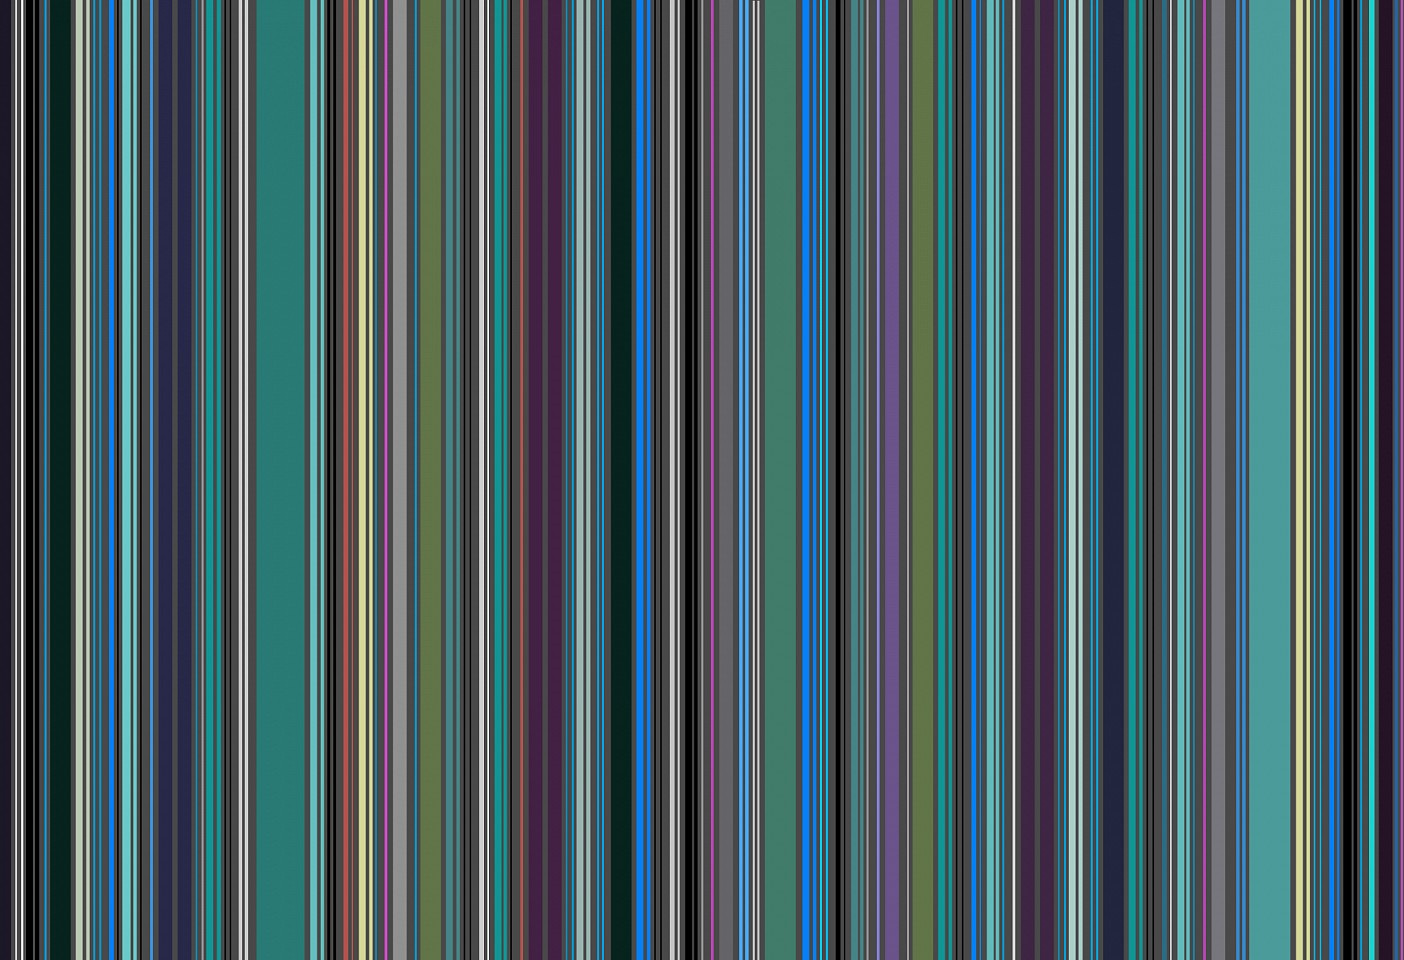 Dane Albert, Color Sticks #25 Night, 2023
Acrylic on canvas (Concept), 48 x 72 in. (121.9 x 182.9 cm)
Series of colored lines and shapes in multiple configurations
DA.2023.sticks-025-night